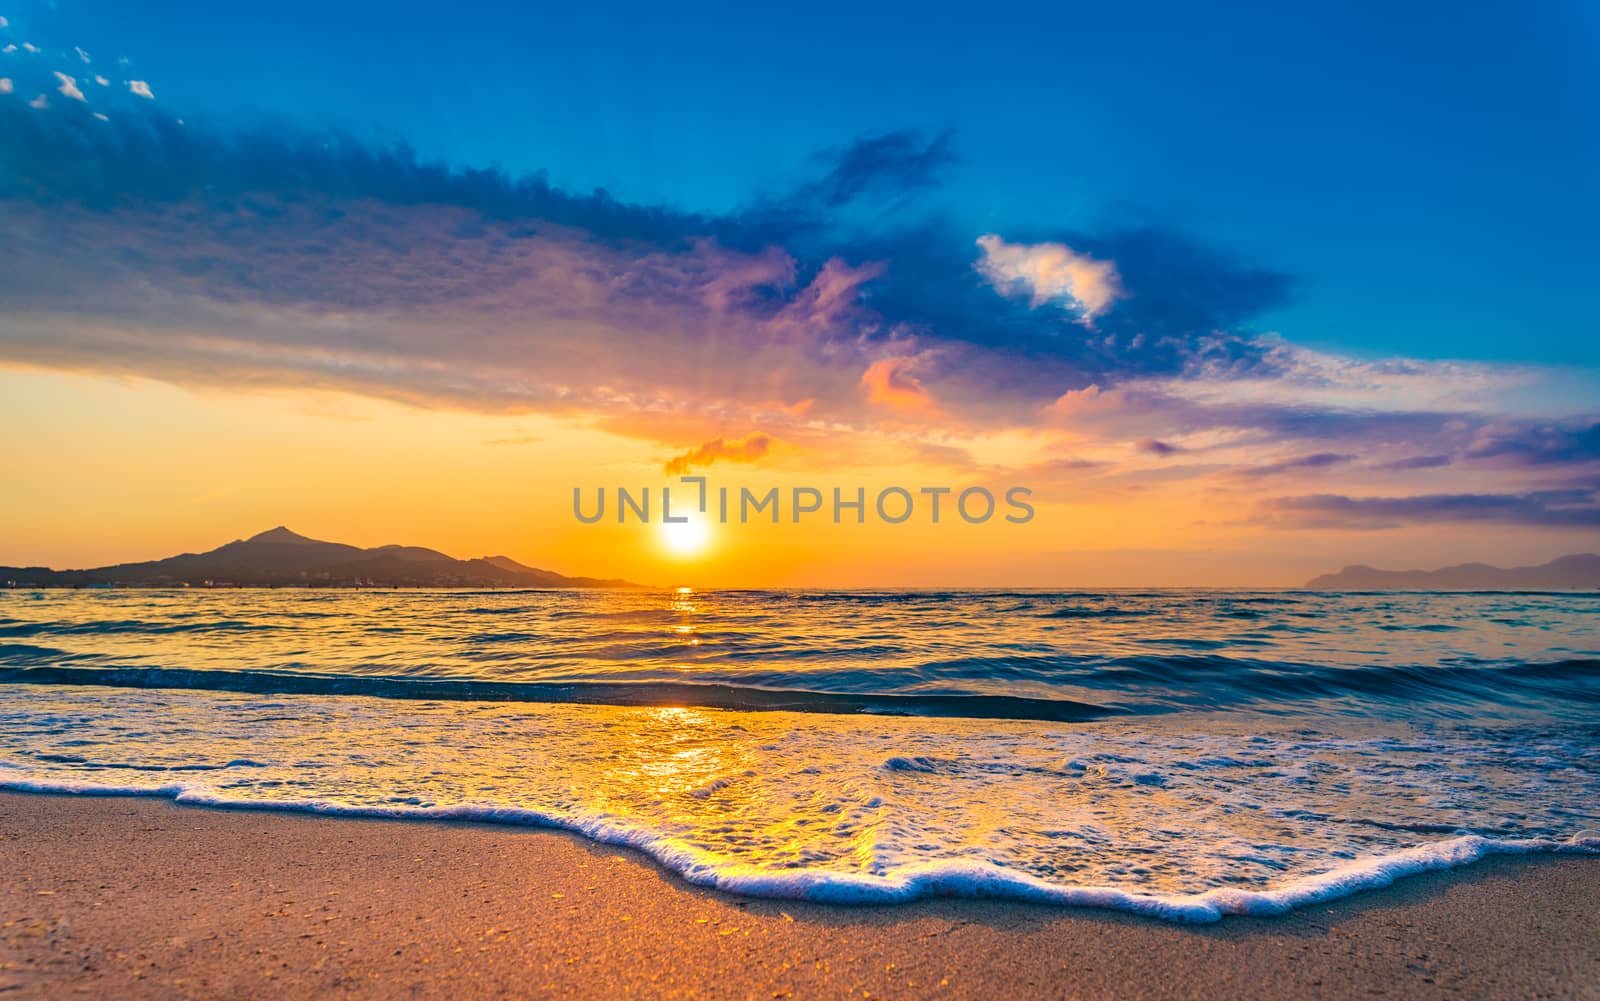 Break of dawn scene on the beach with soft sea water wave on sand